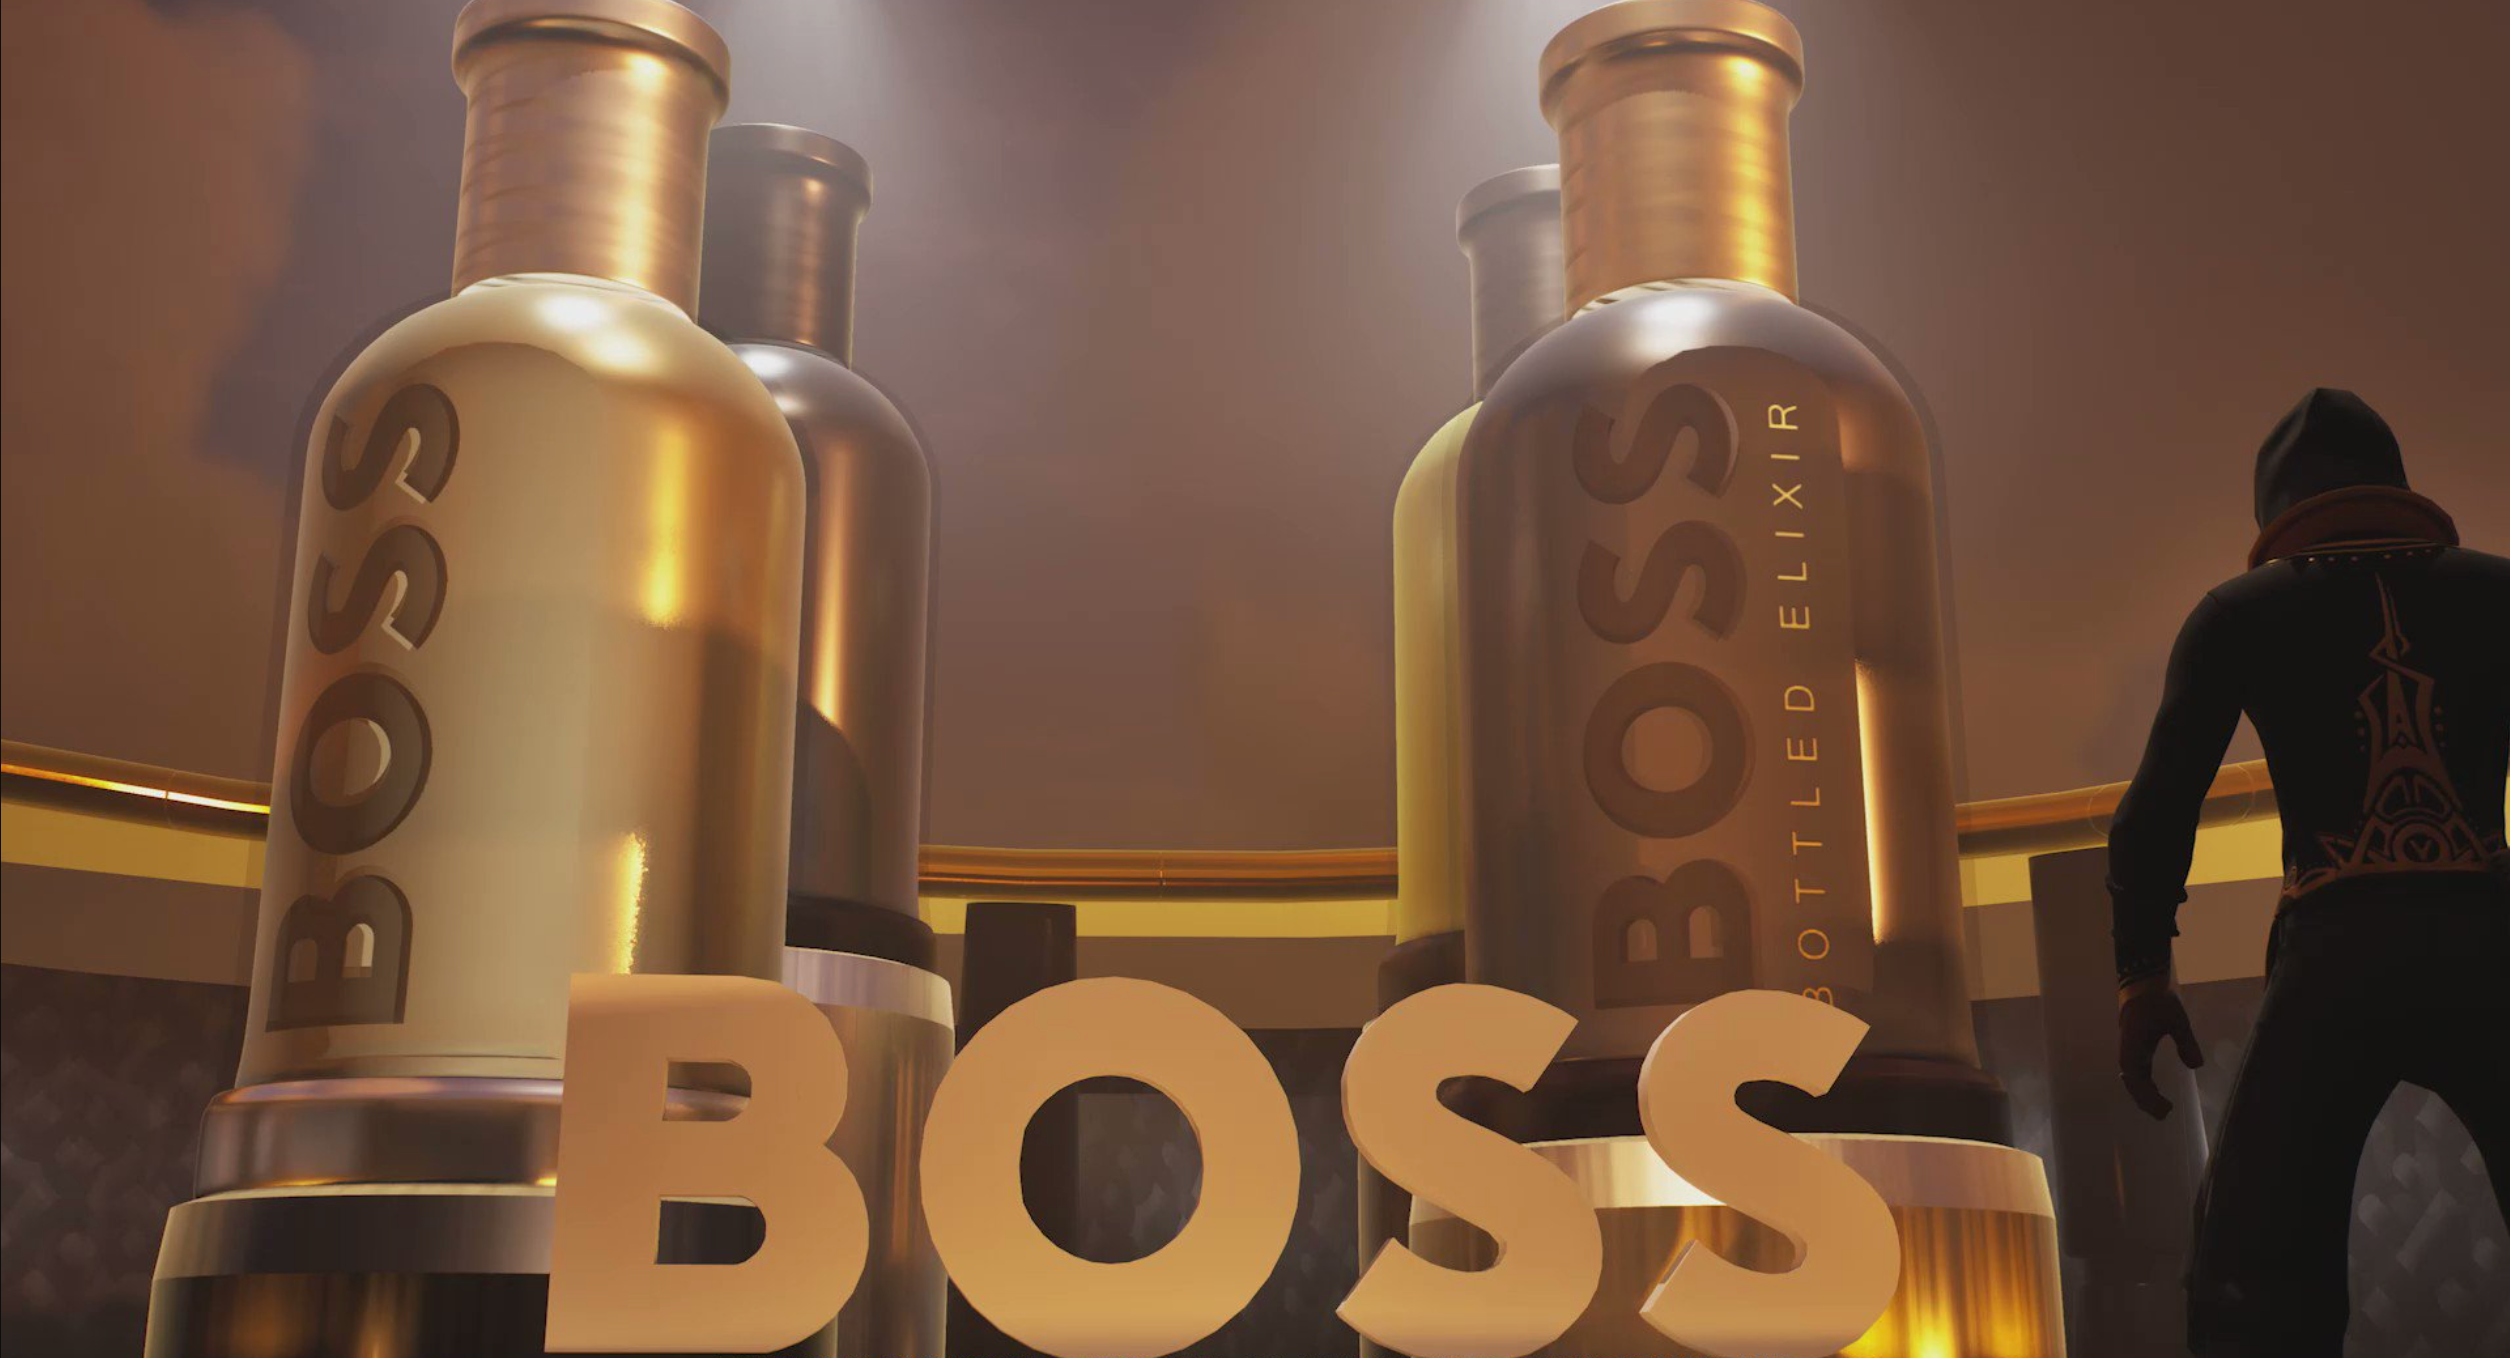 Boss introduced gamers to its fragrance through a gamified experience in Fortnite. Photo: Fortnite